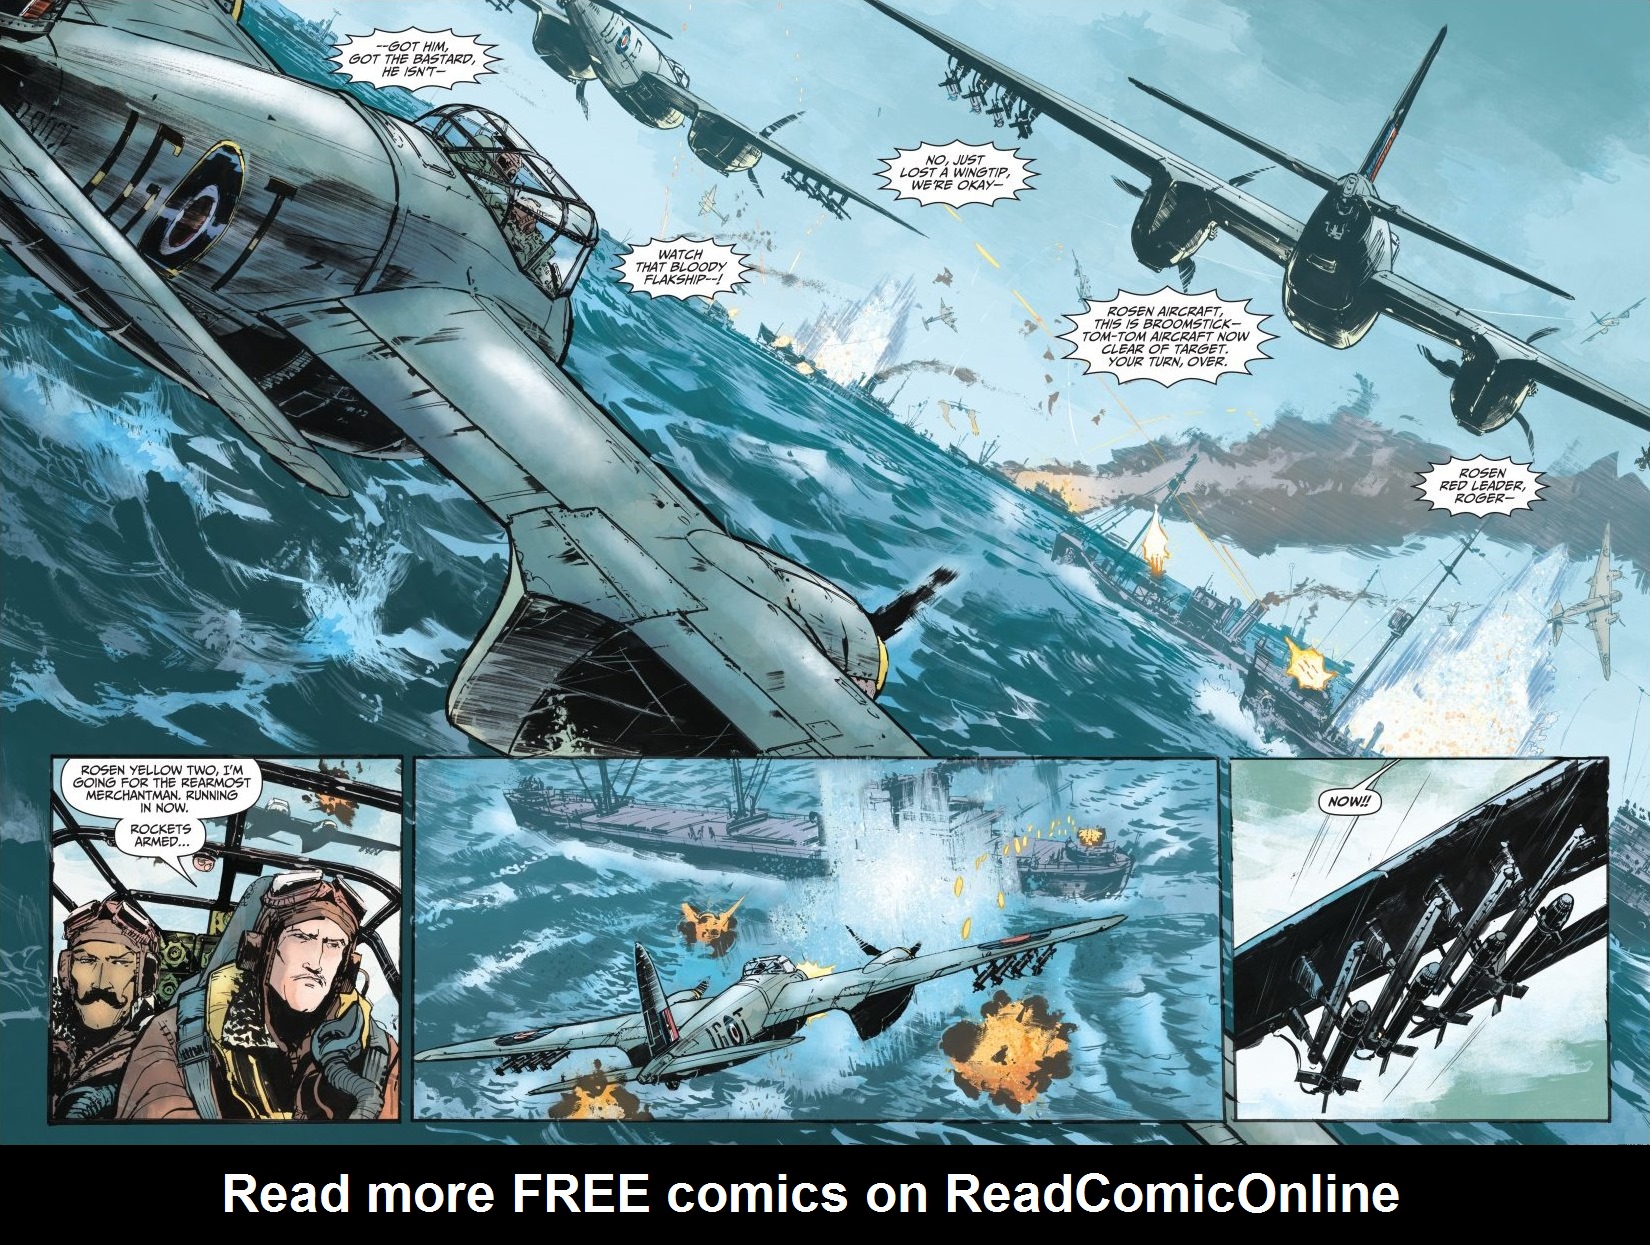 Read online Out of the Blue comic -  Issue # TPB 1 - 17